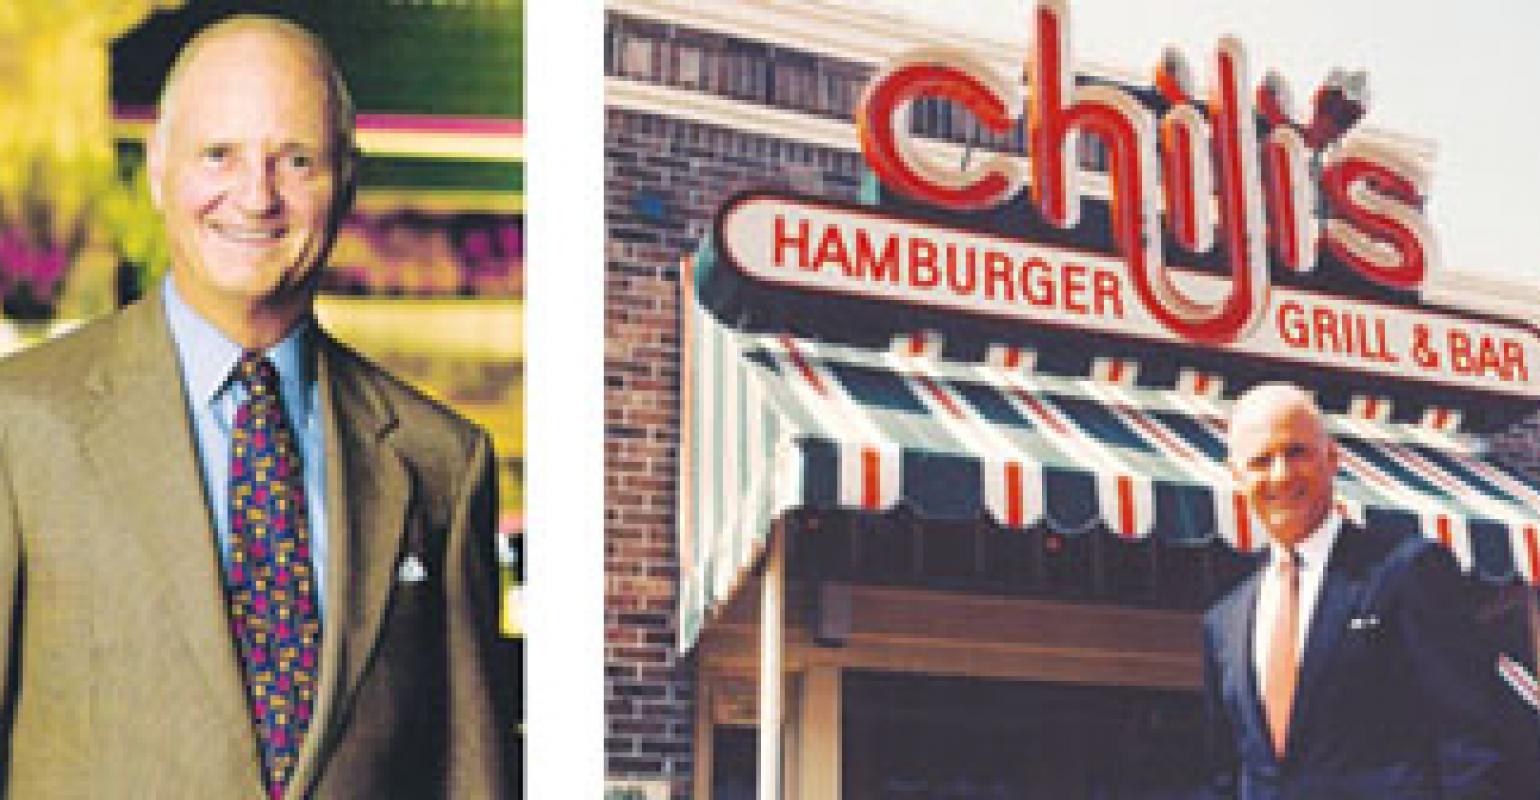 Norman Brinks Founder of Chili's